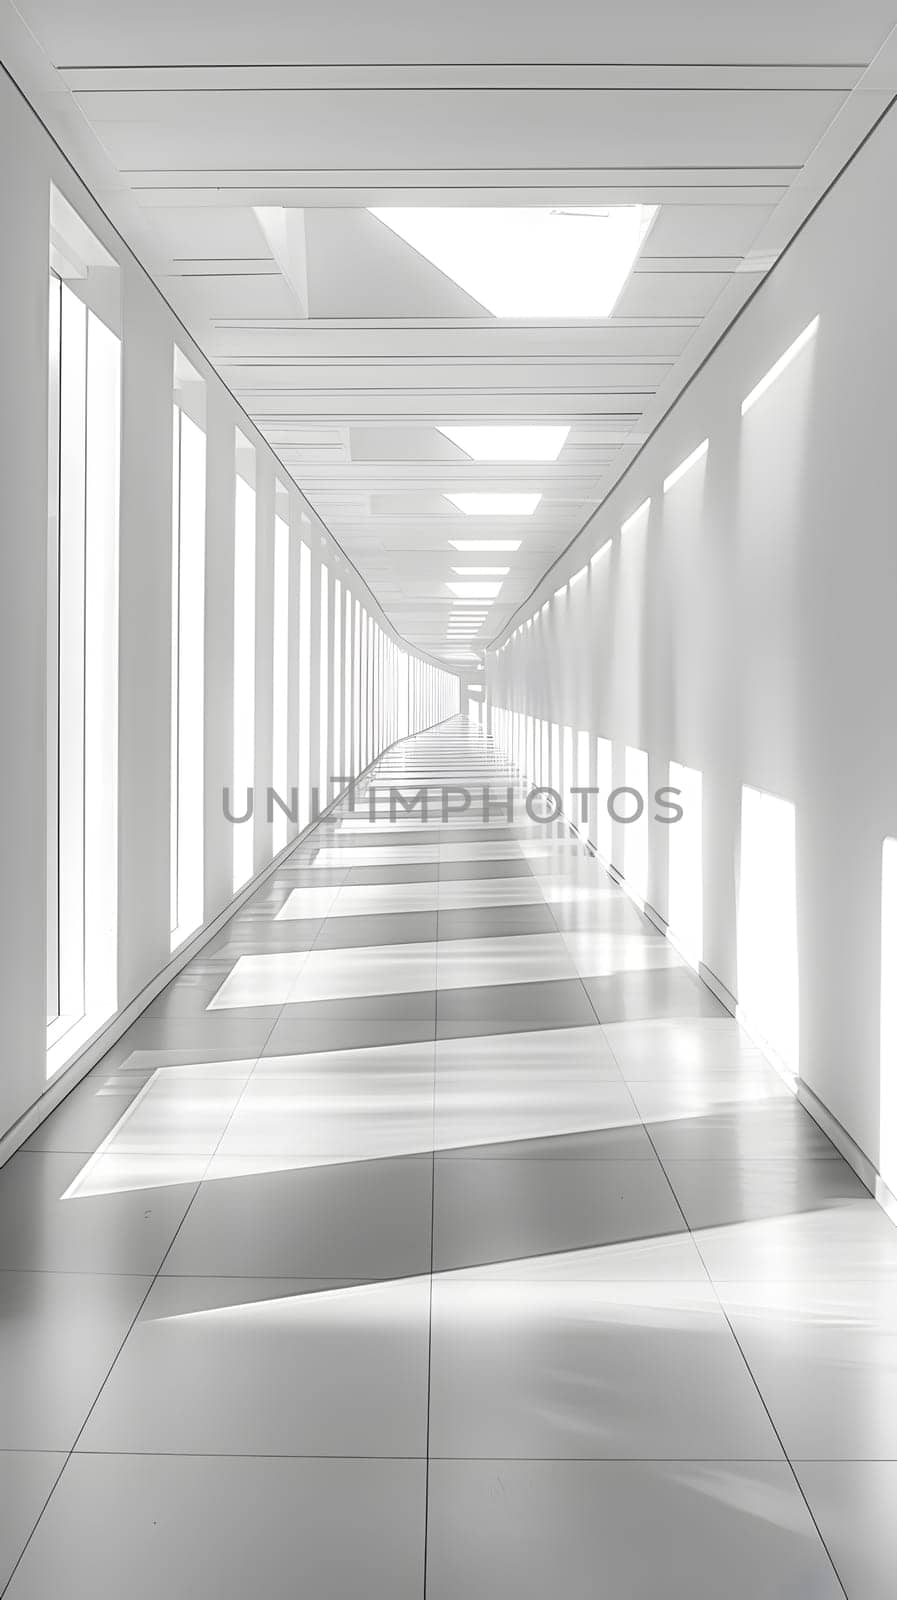 A blackandwhite art deco building with a long parallel hallway featuring a symmetrical arrangement of windows, flooding the space with natural light from the glass ceiling